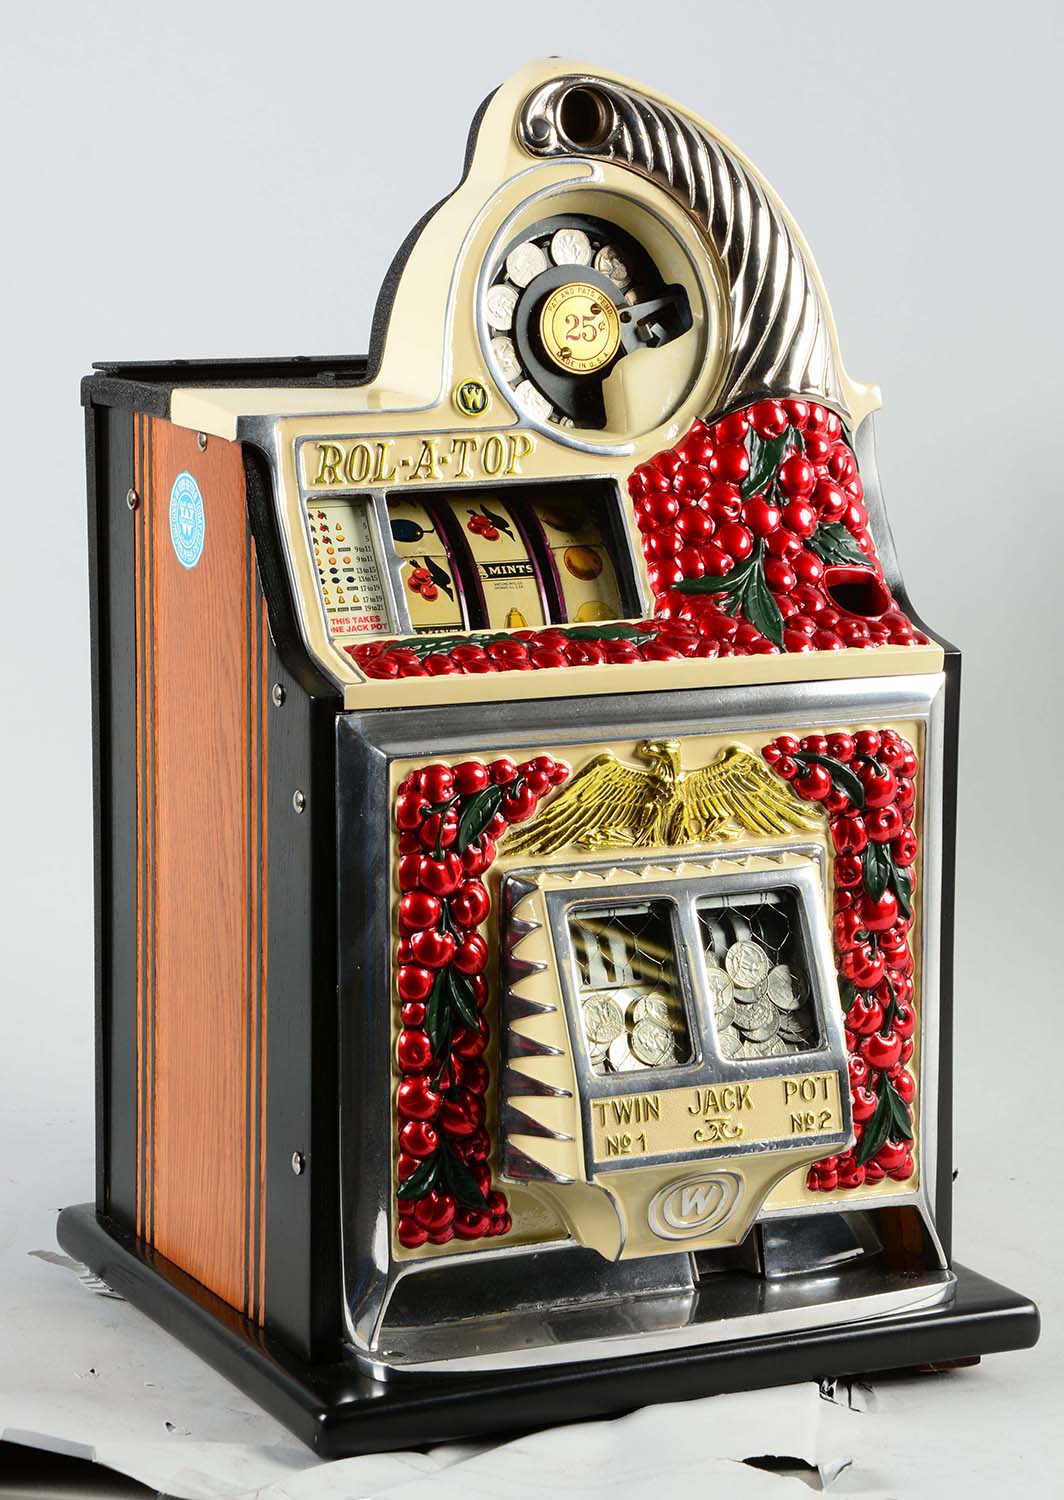 25¢ Watling Cherry Front Slot Machine, Estimated at $7,000-10,000.